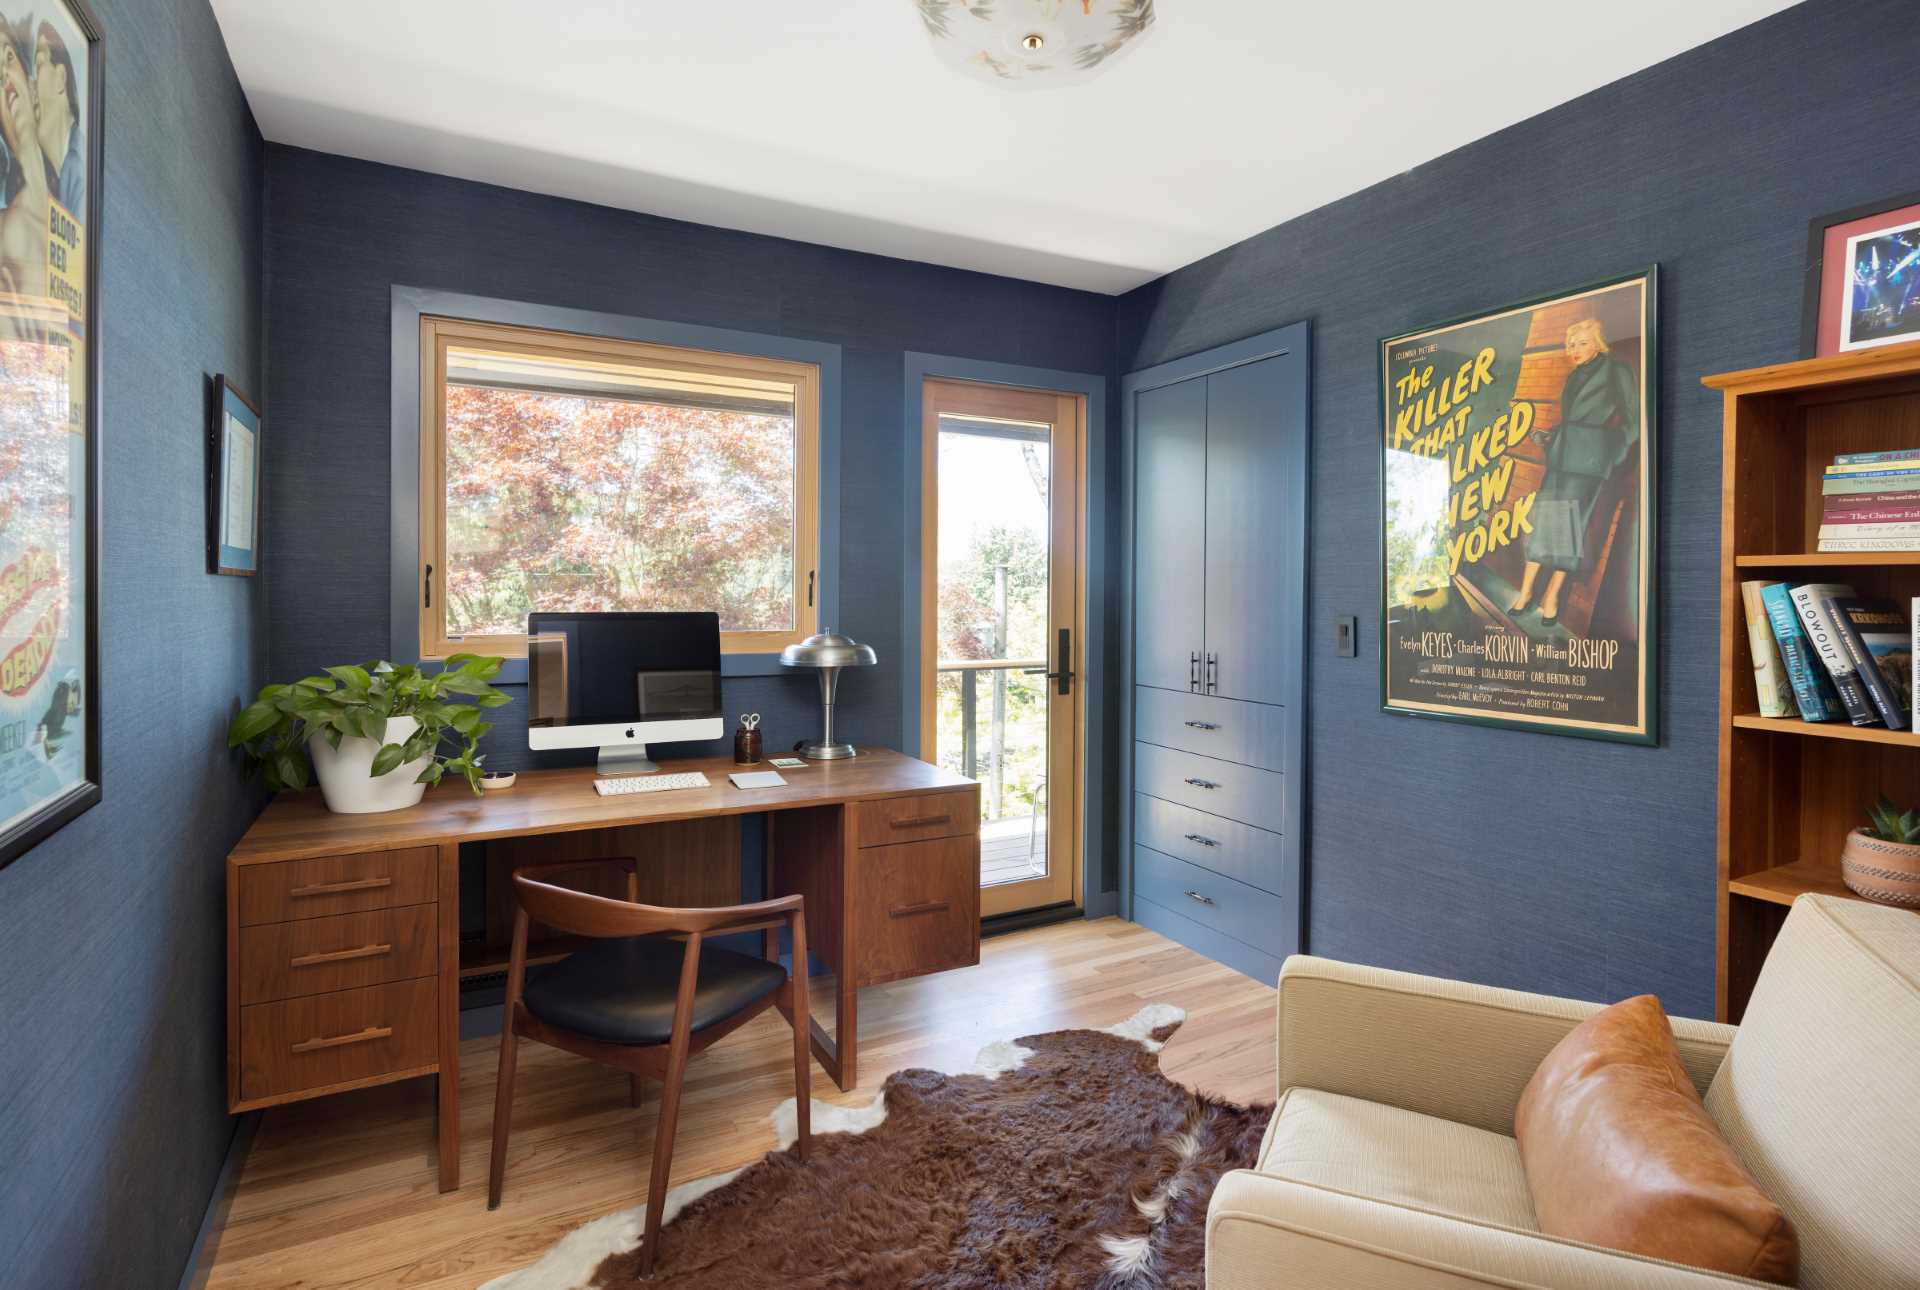 A modern home office has blue walls and wood floors, while the furniture reflects the original mid-century modern aesthetic.